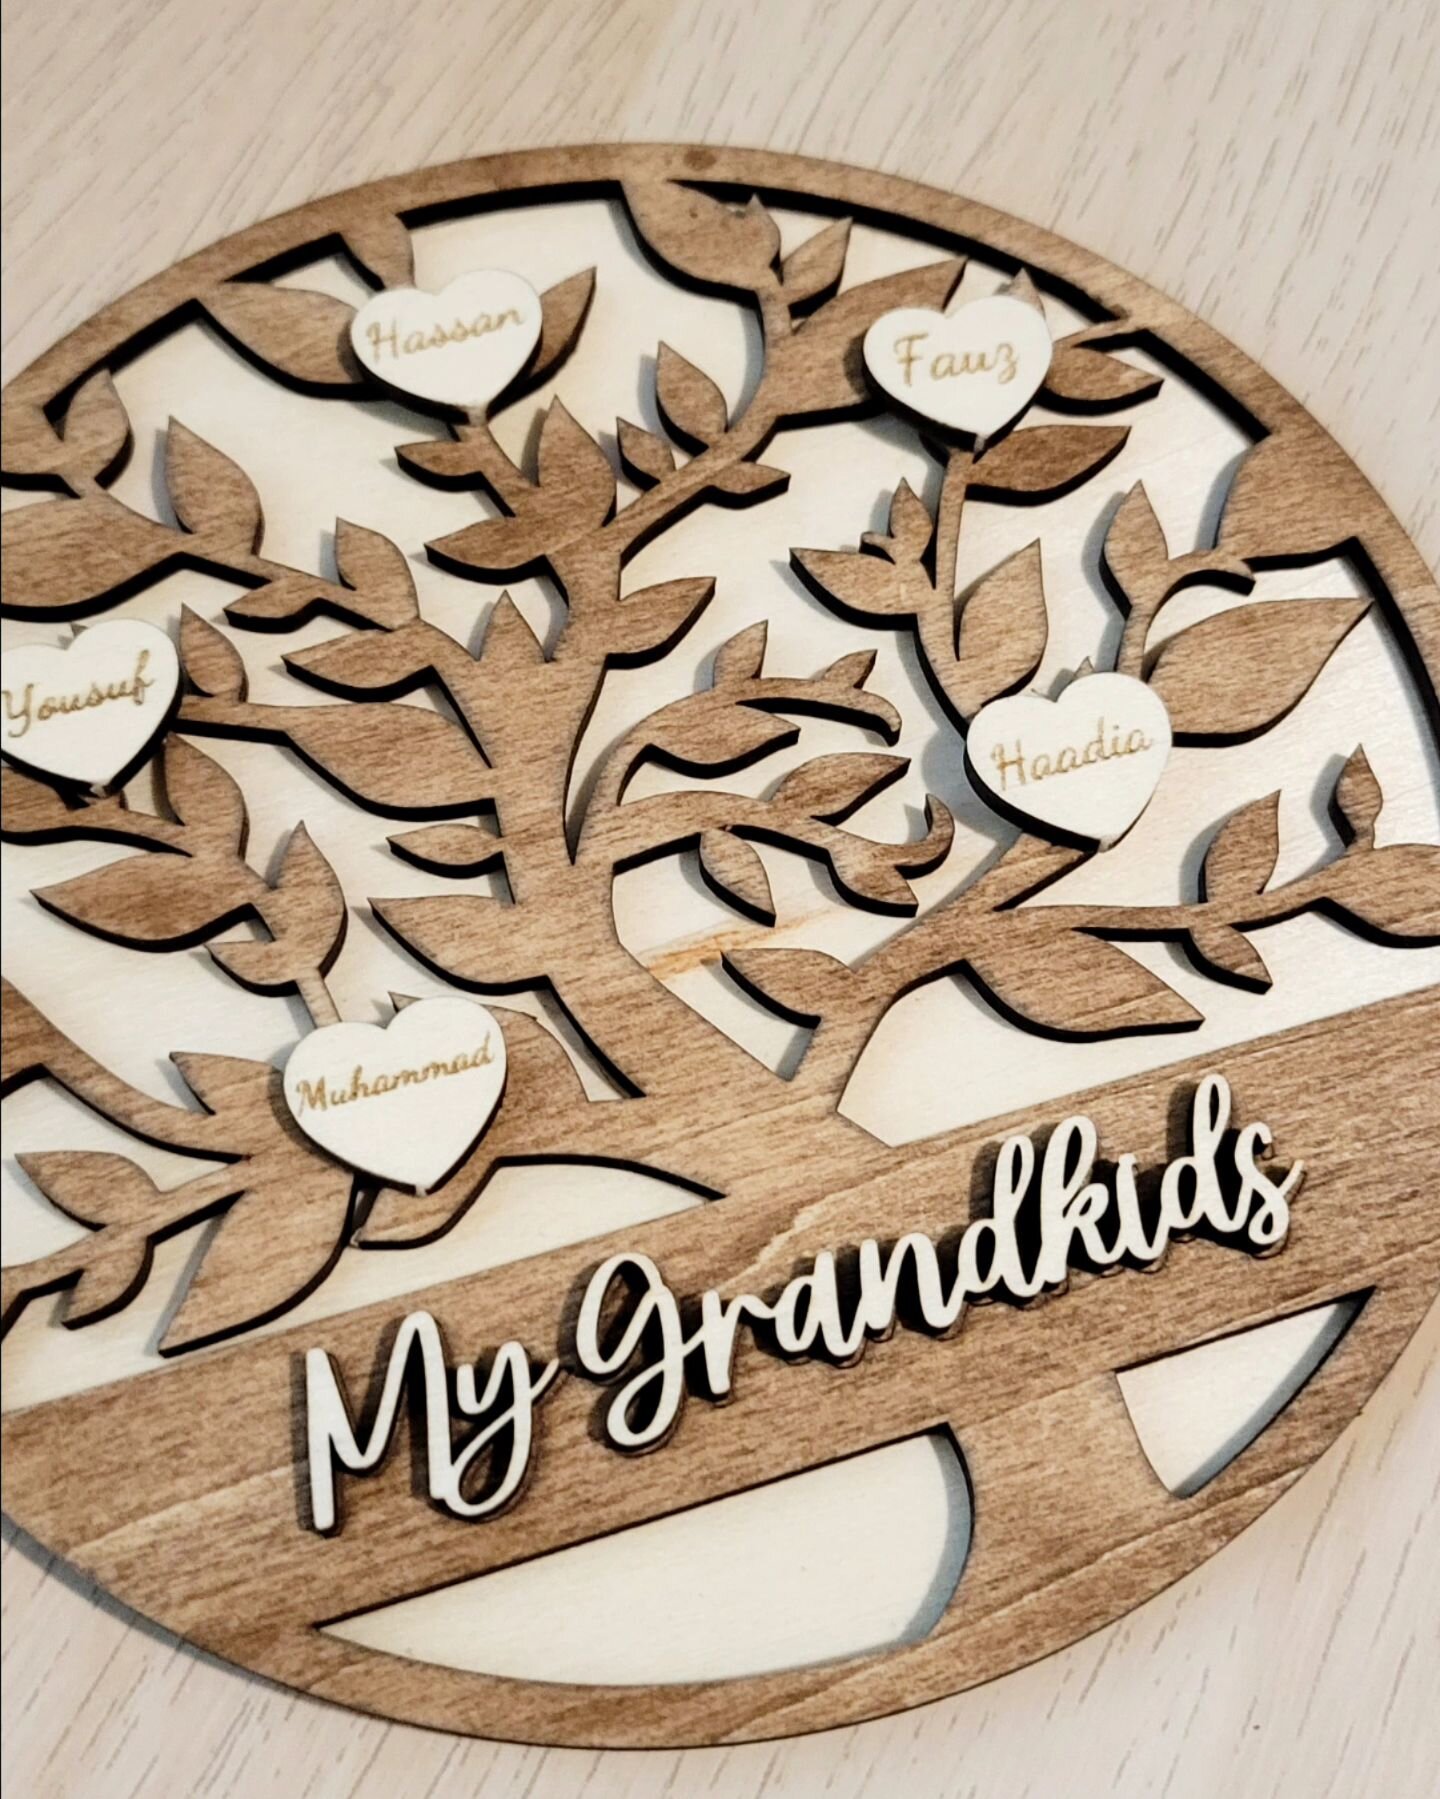 PSA: Mother's Day is only a week away!

#happymothersday #giftforgrandma #familytree